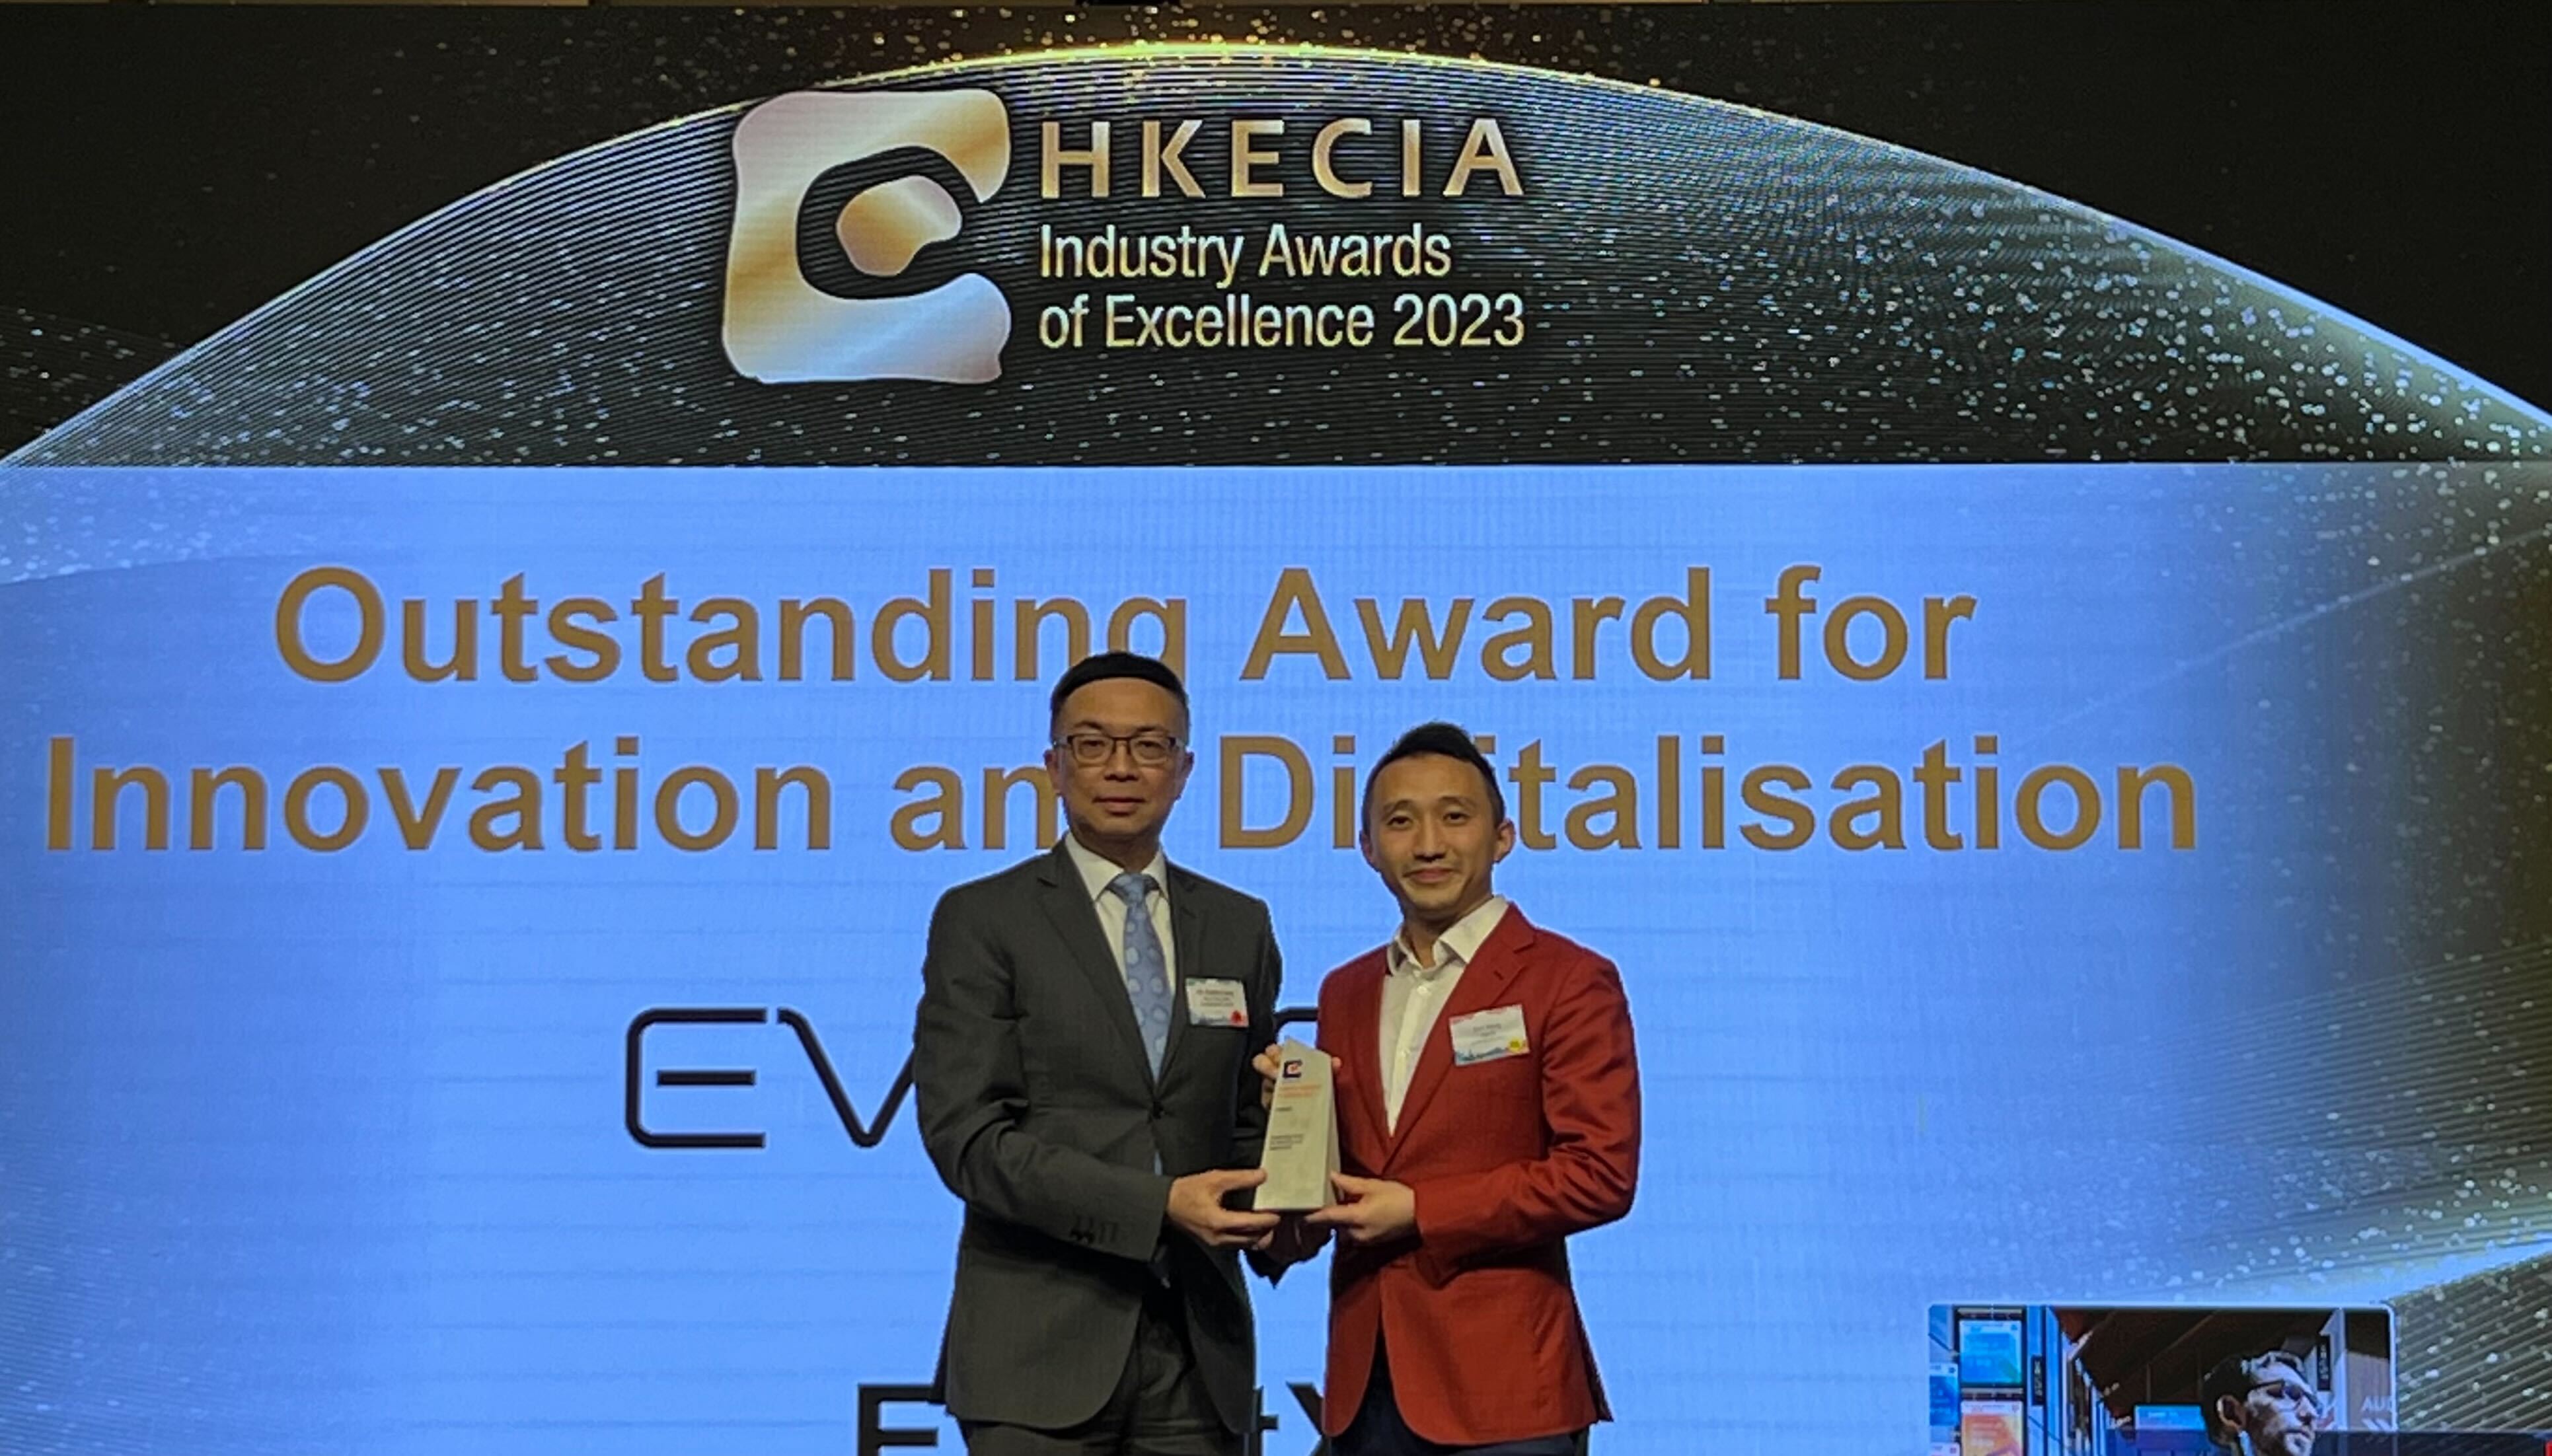 HKECIA’s Outstanding Award for Innovation and Digitalisation